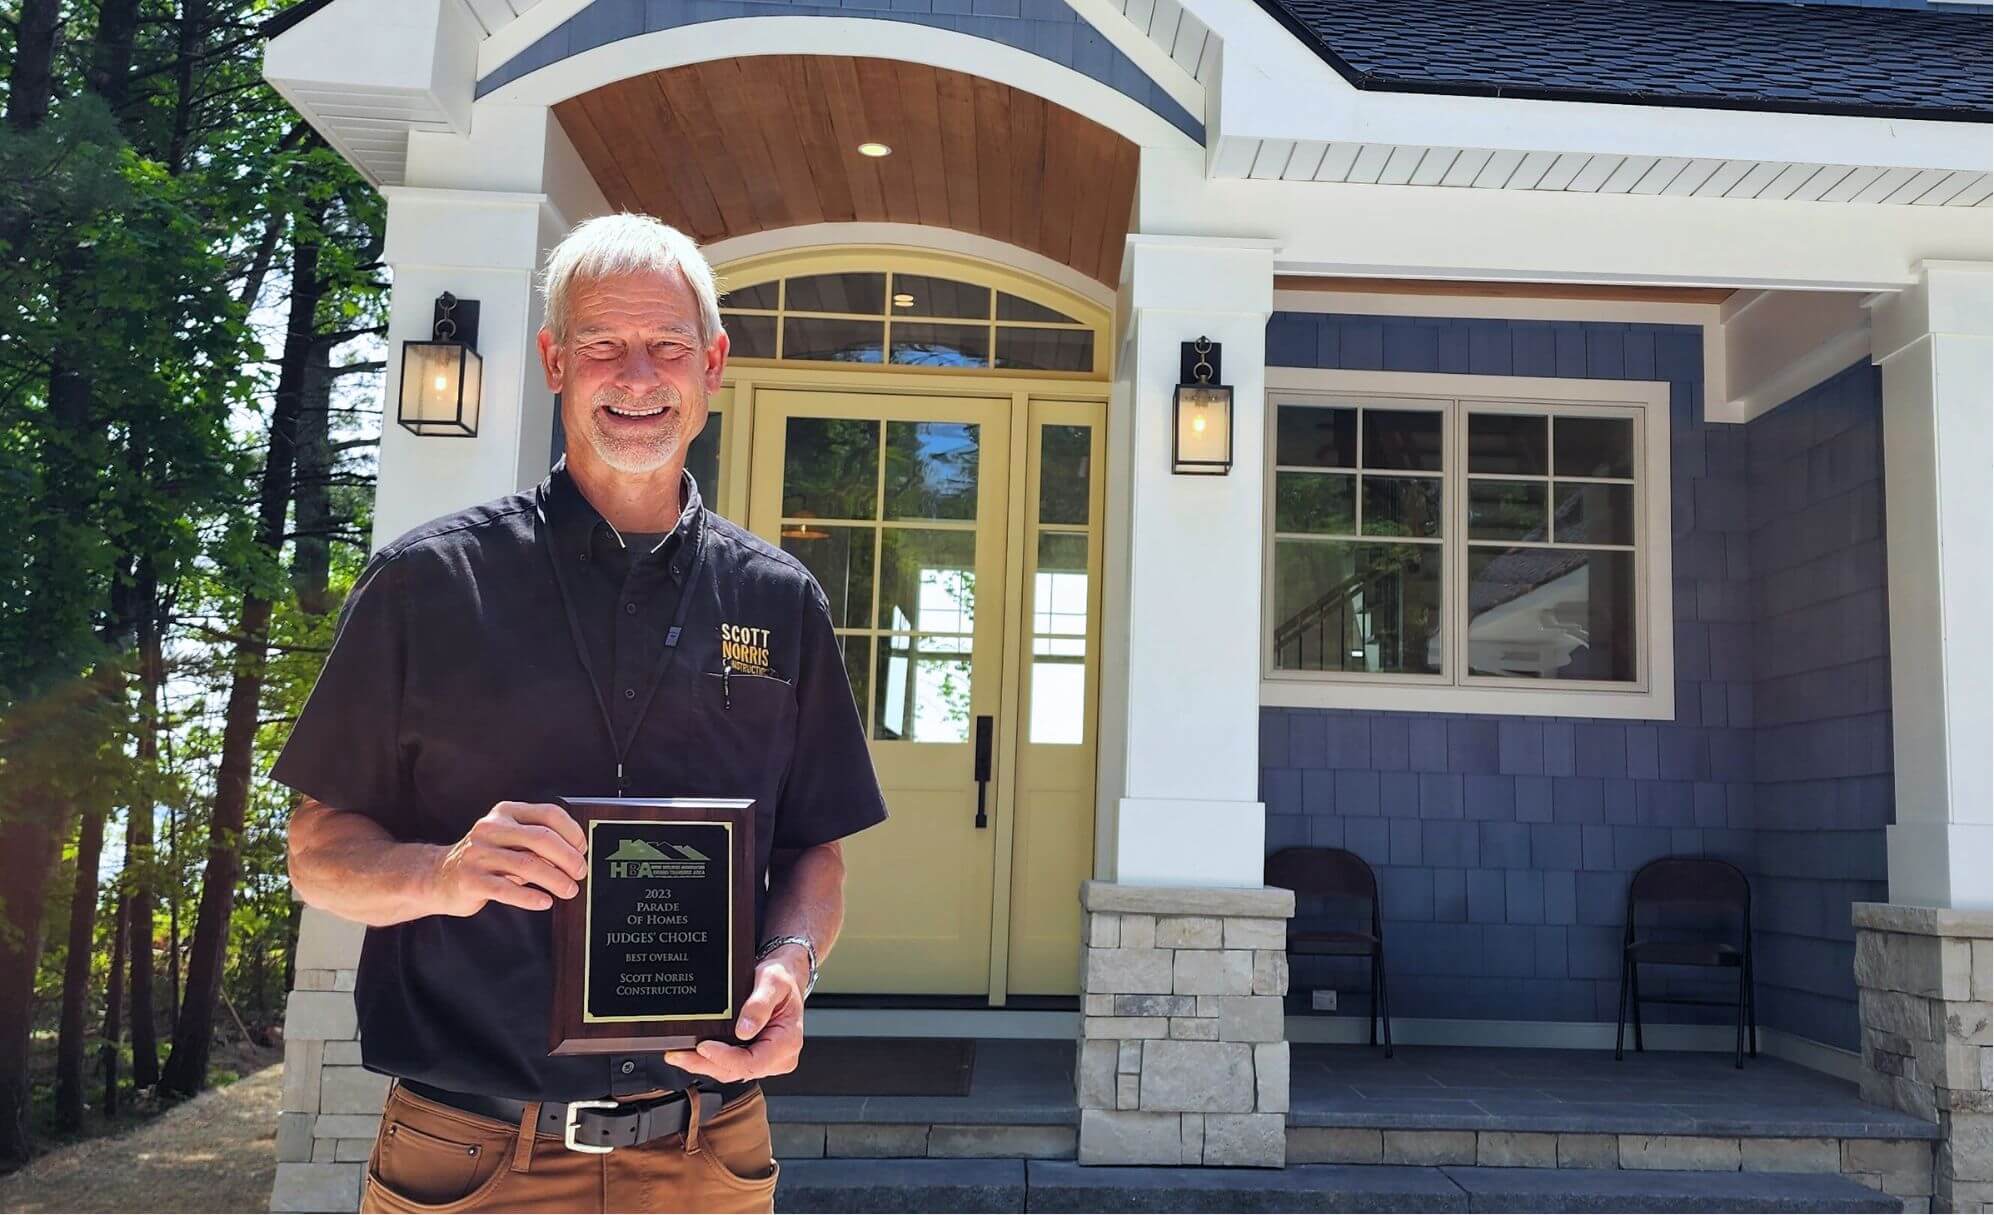 Scott Norris Holds an award for the 2023 Parade of Homes